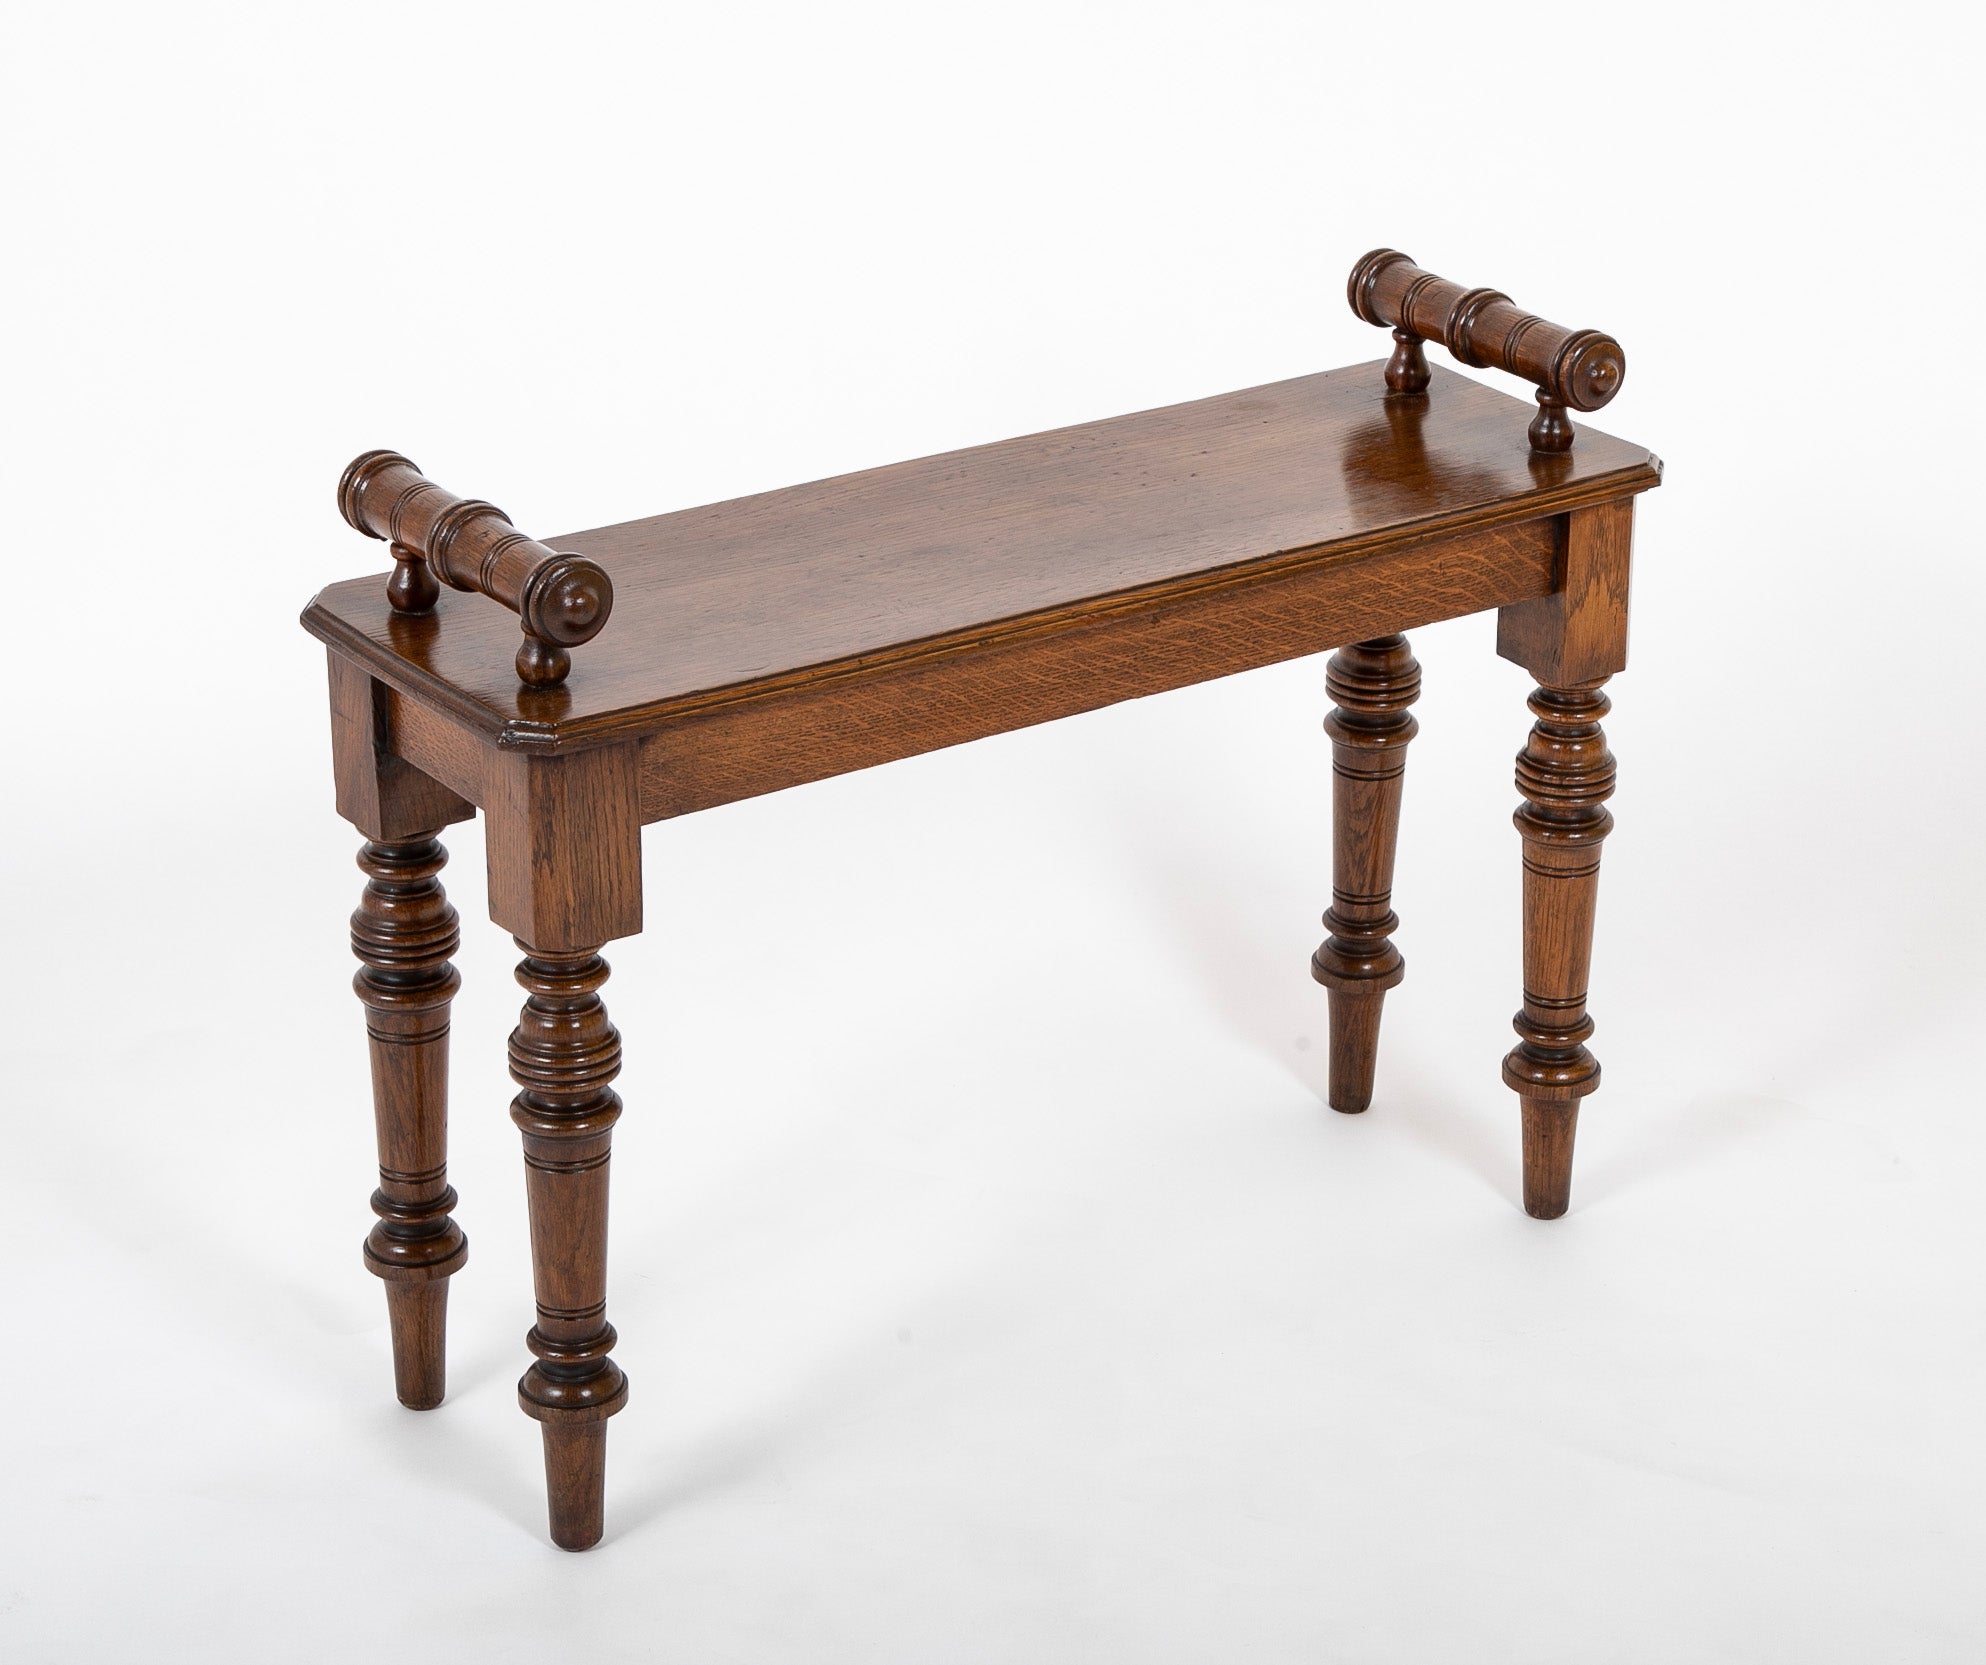 Oak Hall Bench In The Style of George Bullock